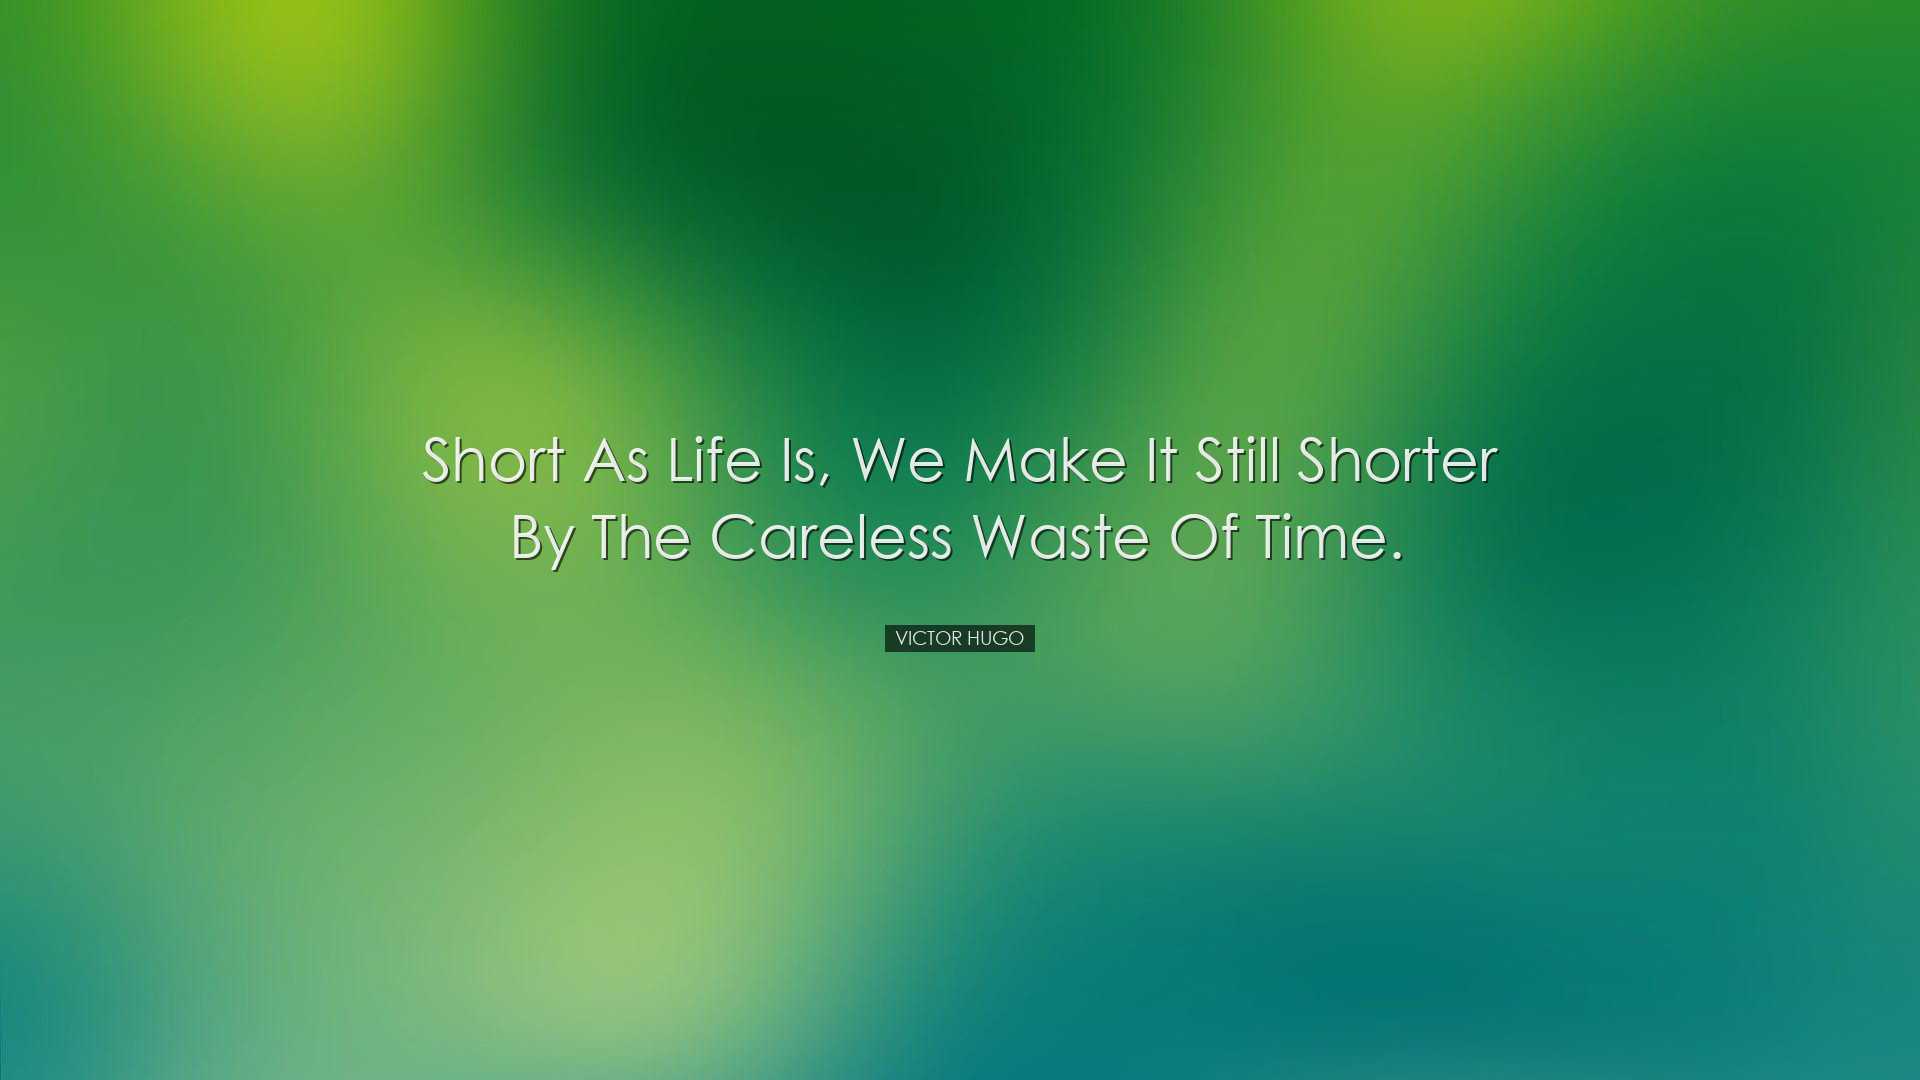 Short as life is, we make it still shorter by the careless waste o